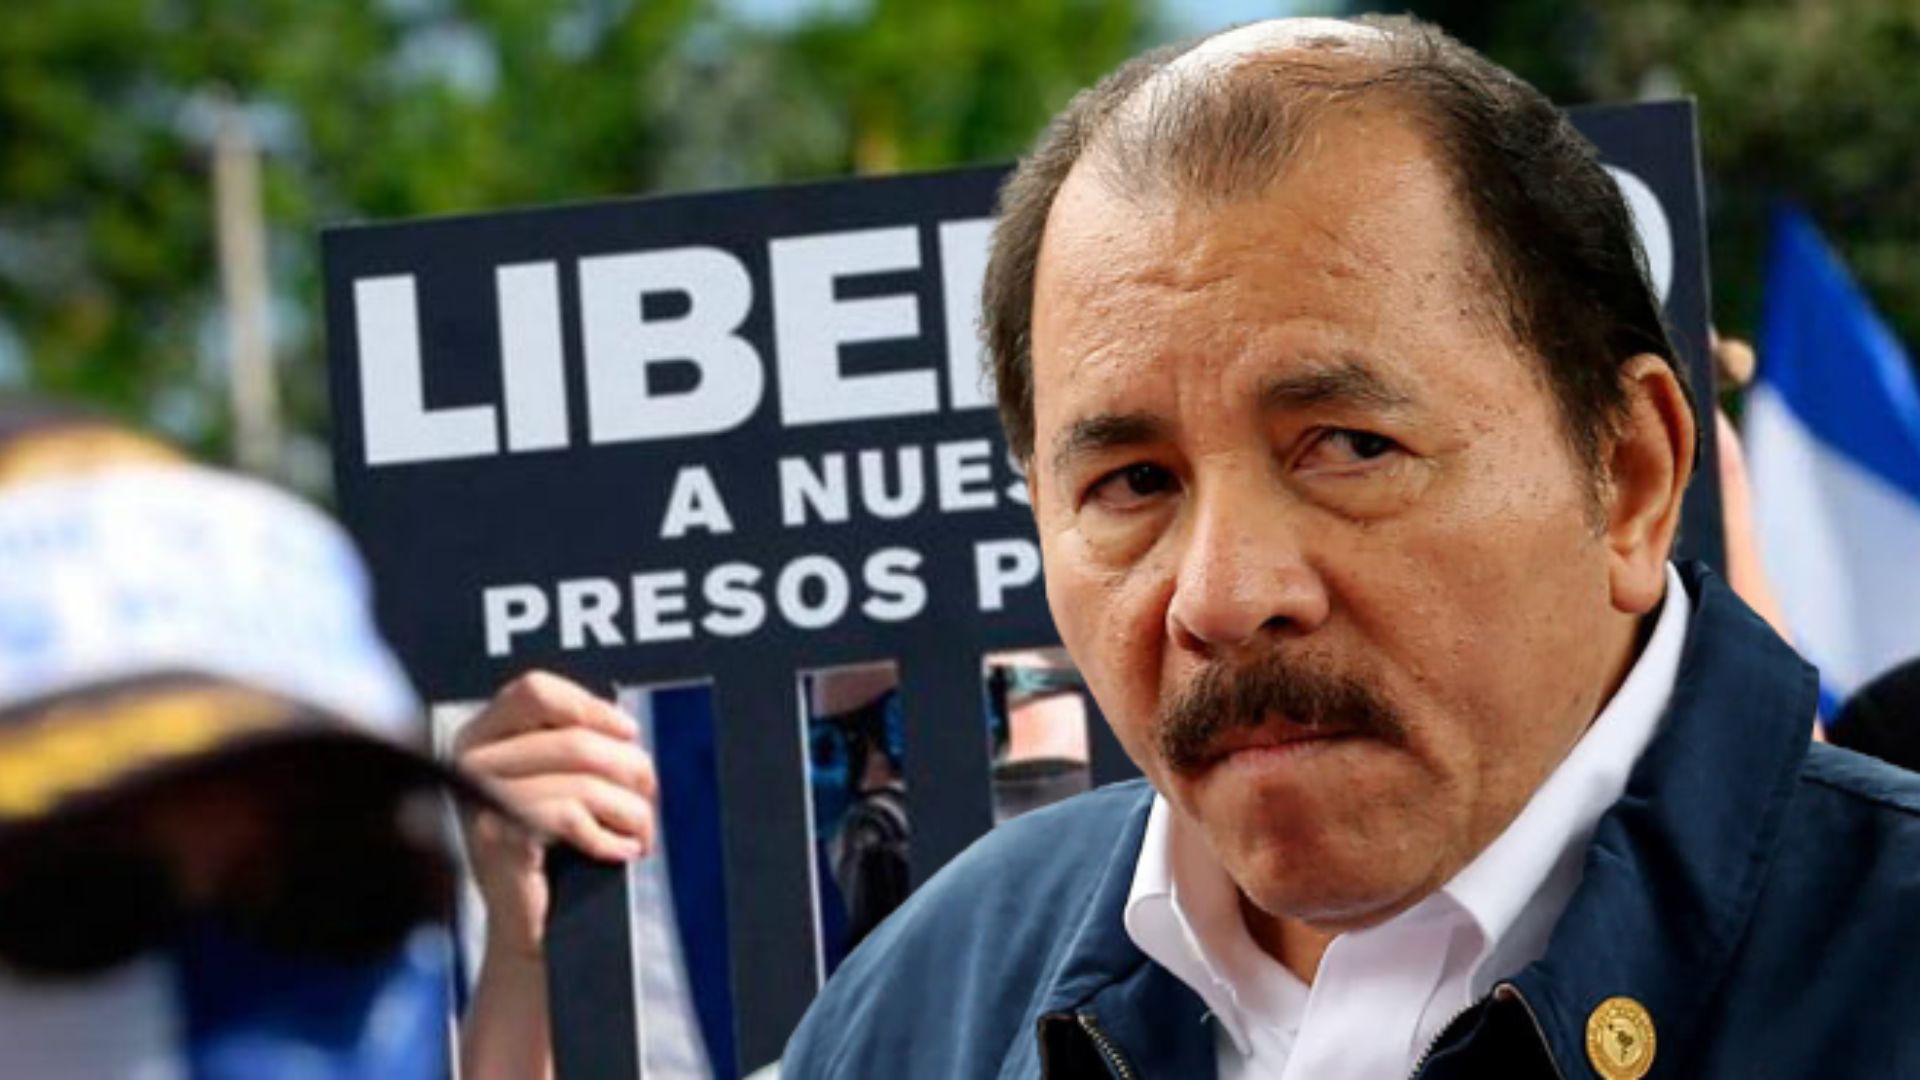 "They are illegally imprisoned", released Nicaraguan politicians continue to campaign for the release of more than 60 imprisoned opponents of Ortega